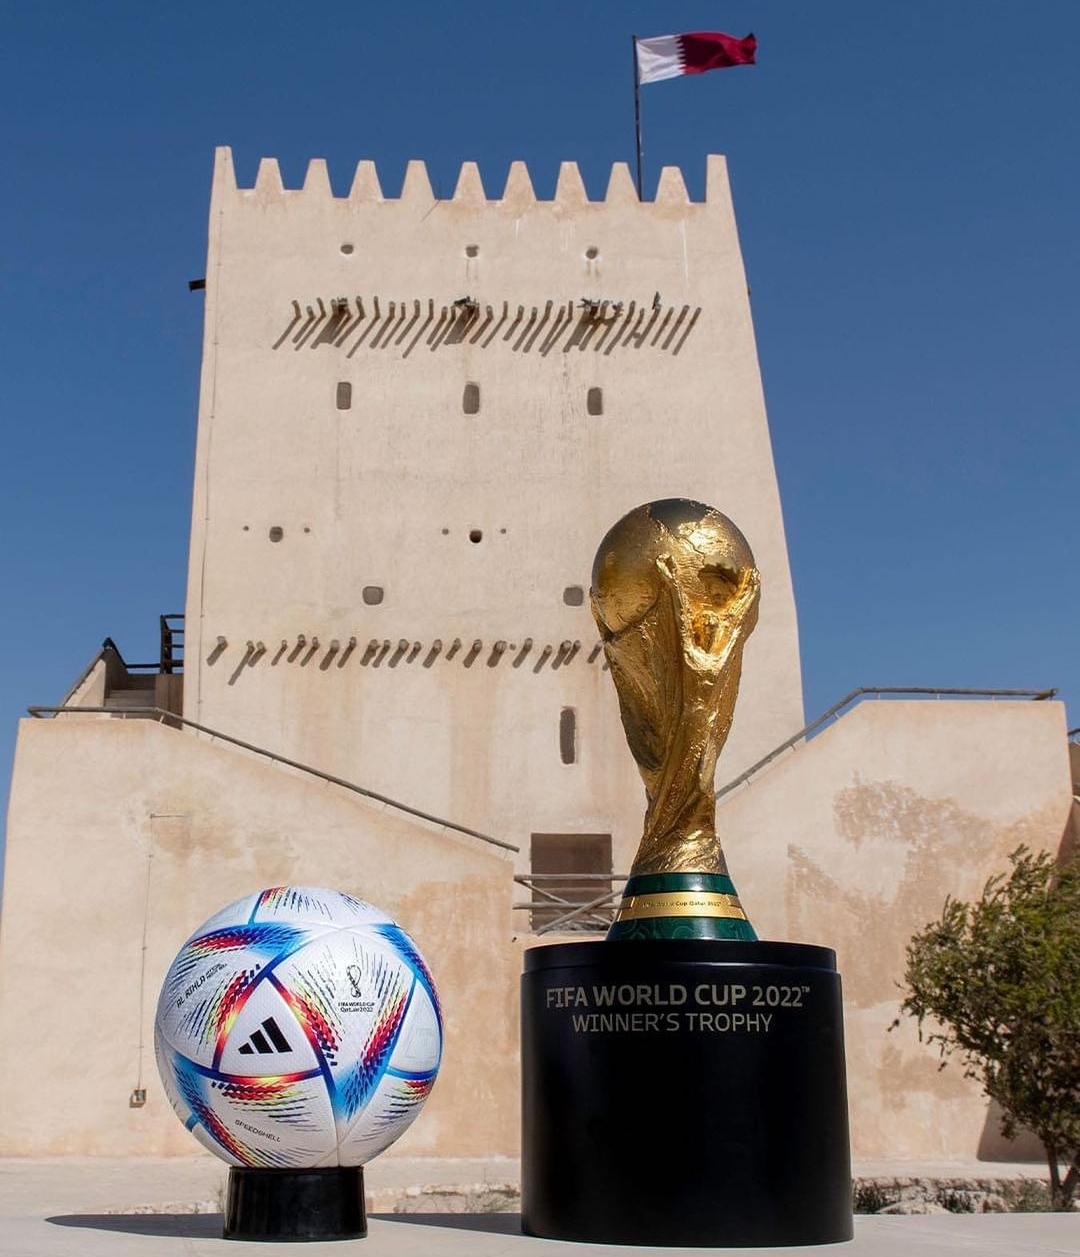 Qatar 2022 World cup: A perfect fit for sports tourism